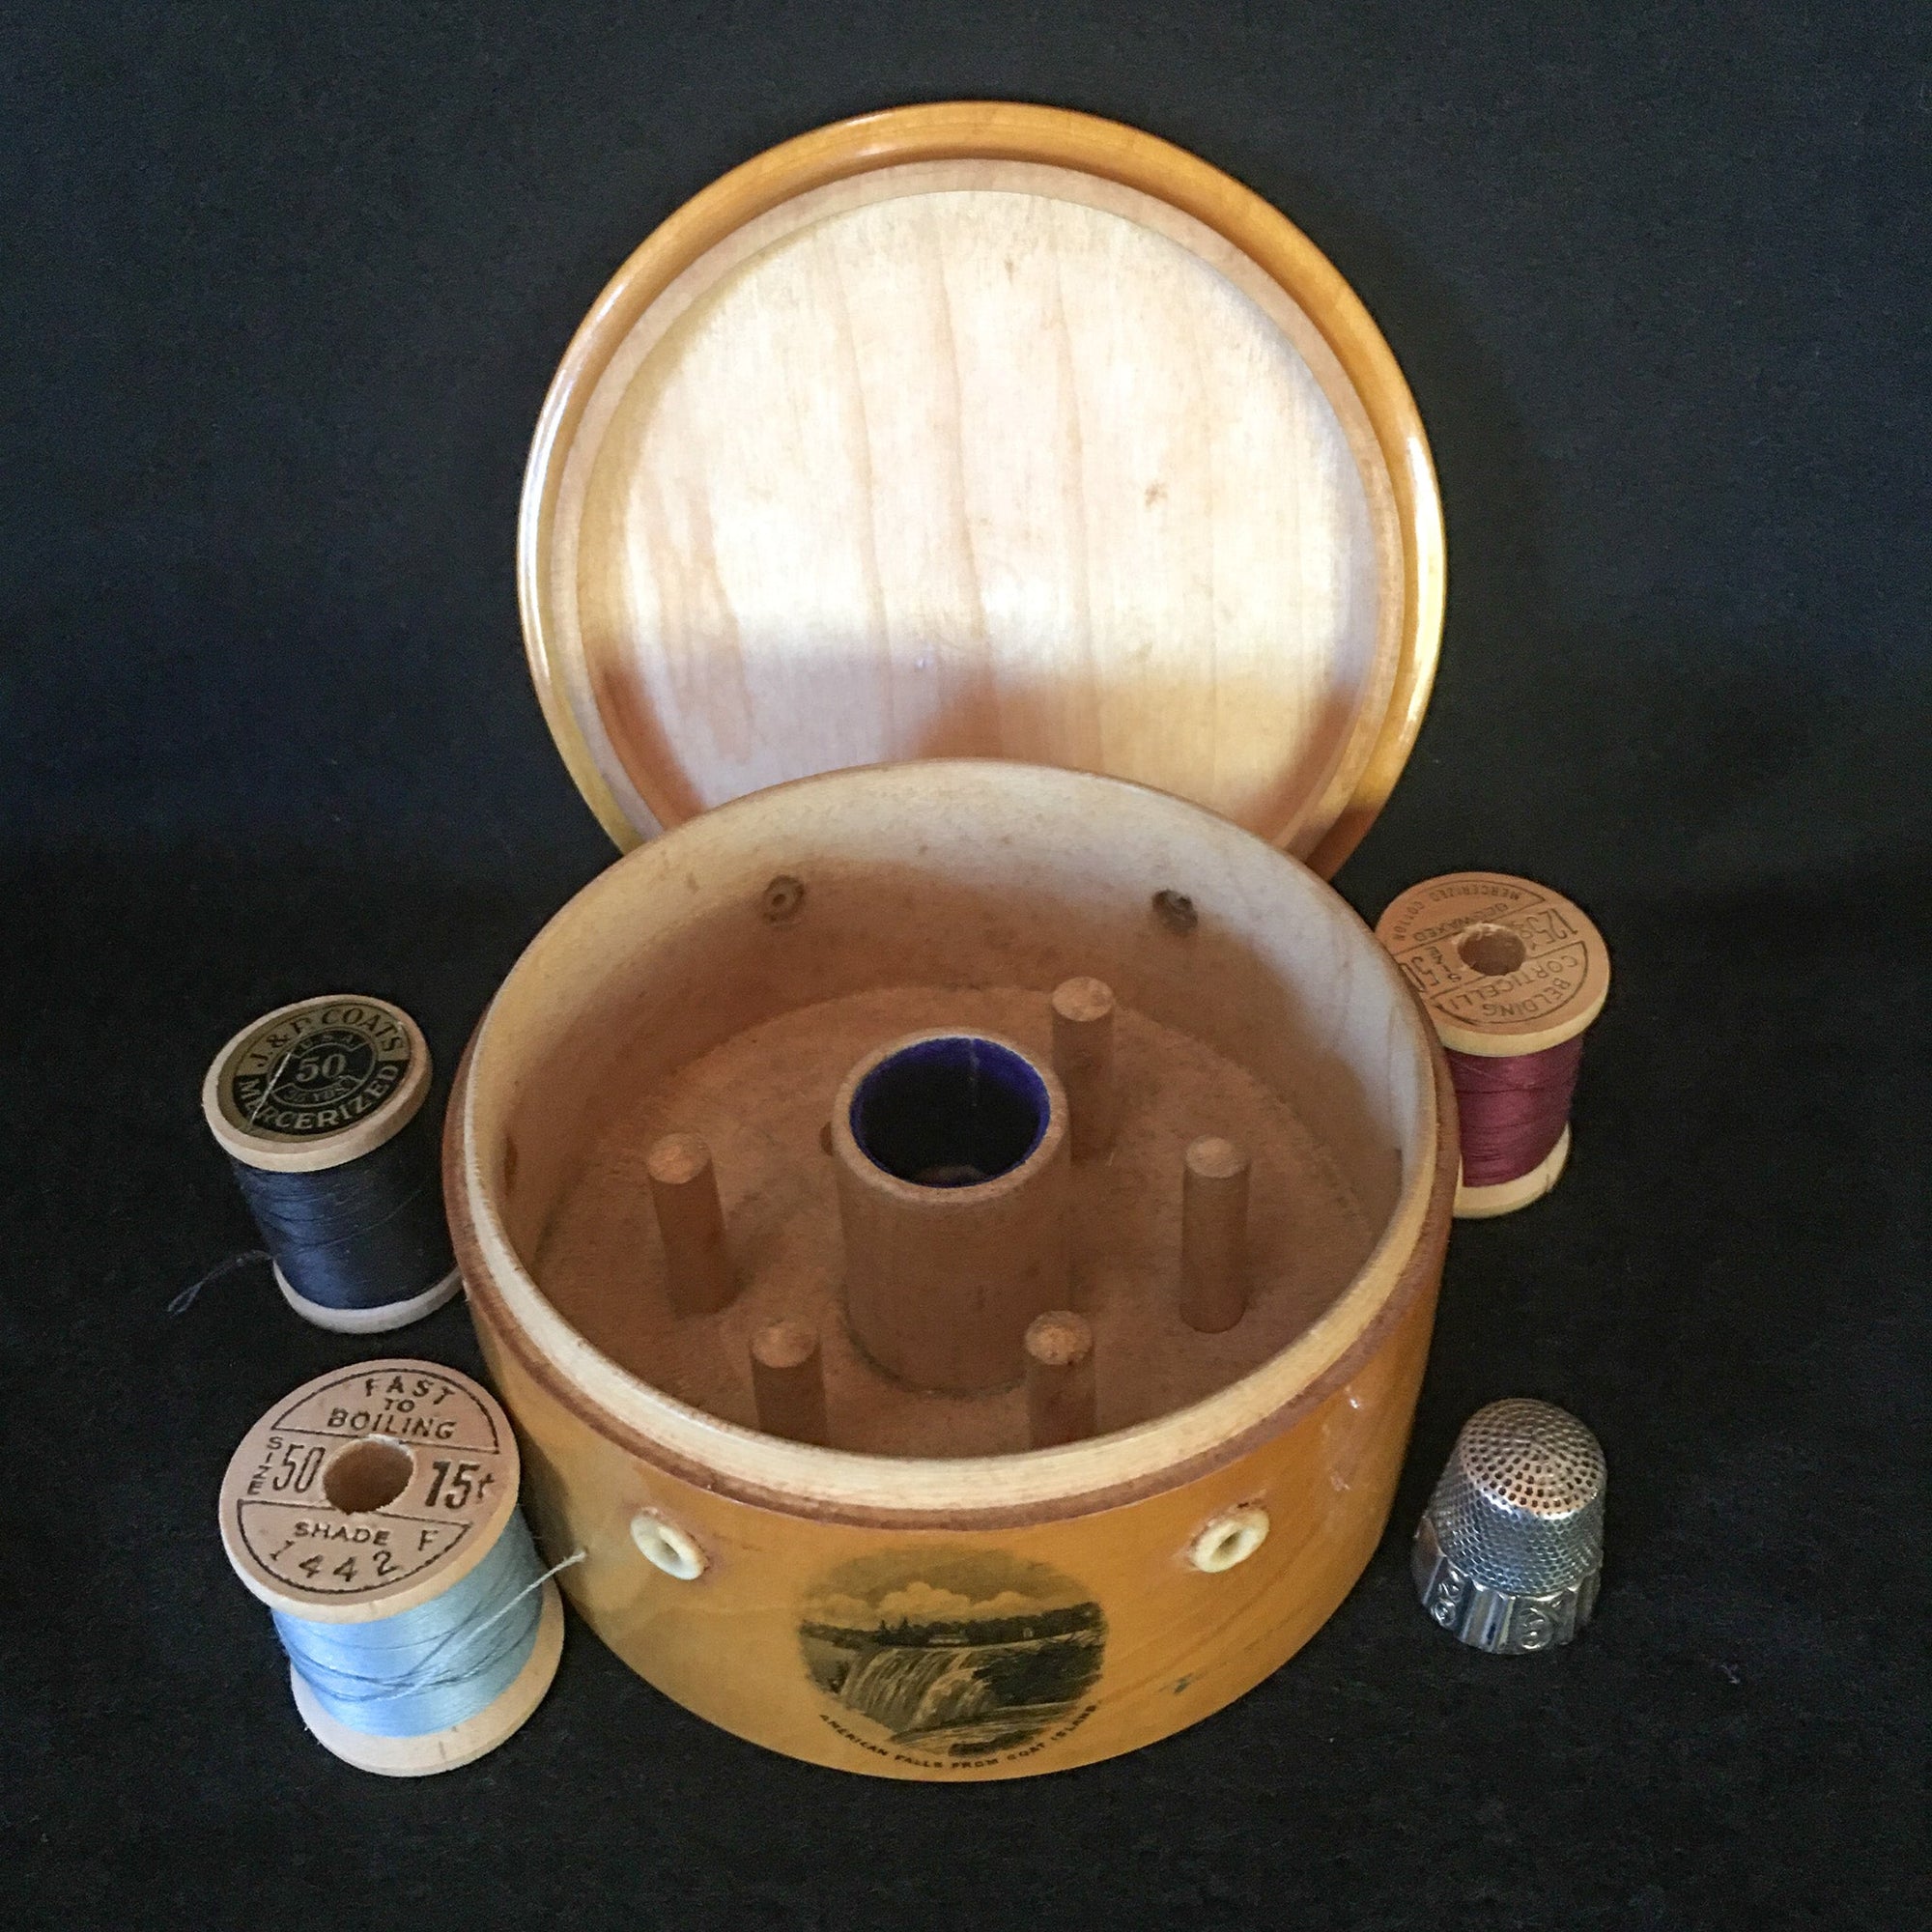 1880’s – 1910’s Mauchline Ware Spool Holder with Sterling Silver Thimble and Wooden Spools